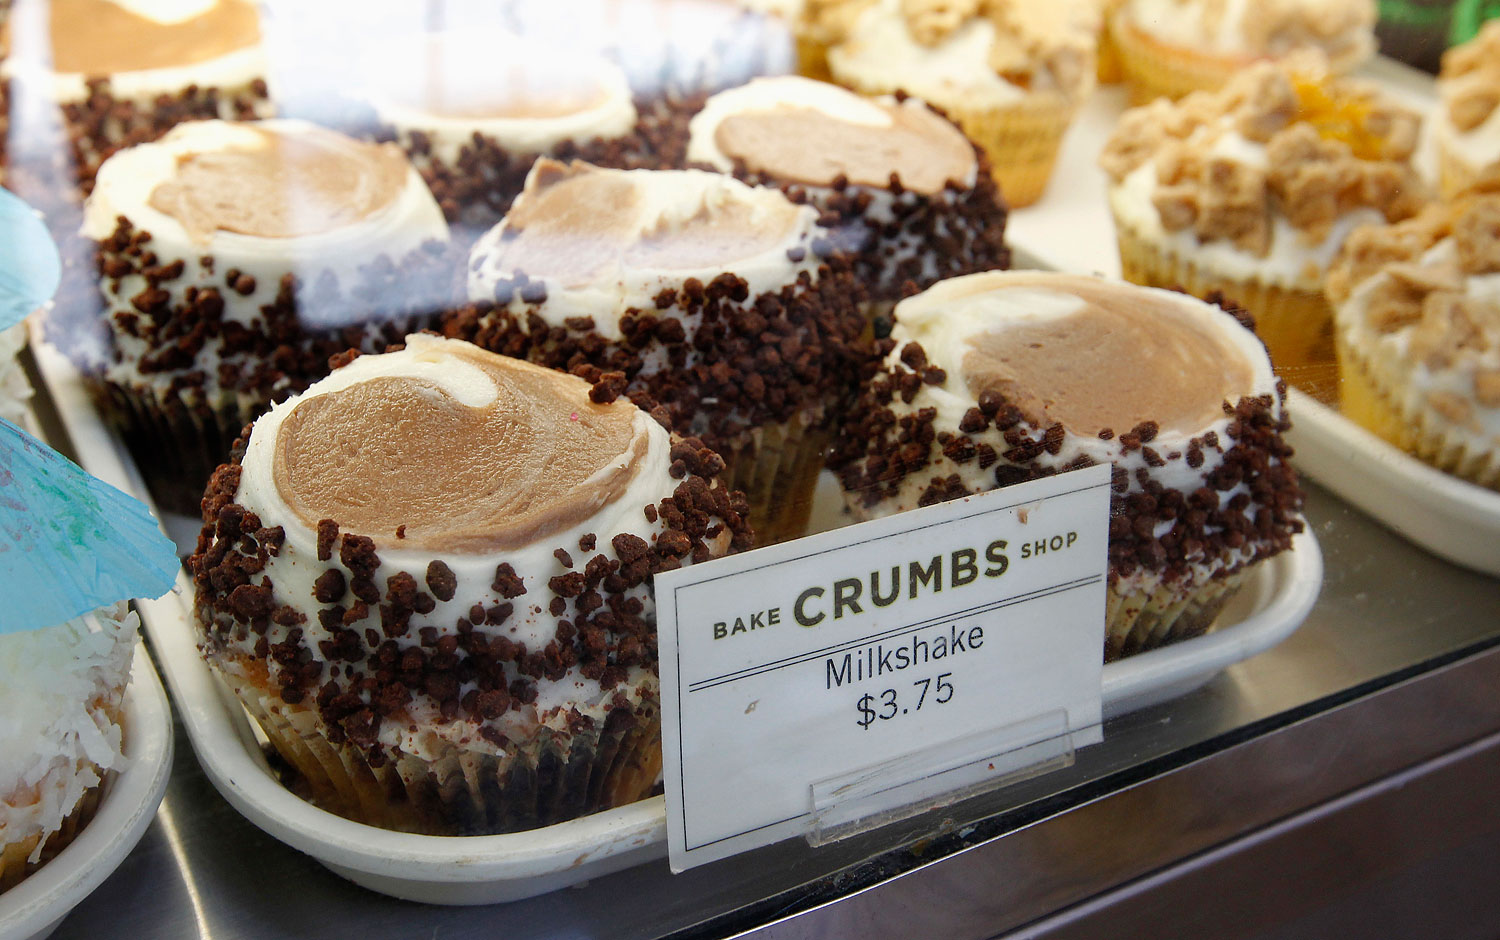 A tray of cupcakes is pictured at a Crumbs Bake Shop, which specializes in over 50 varieties of cupcakes, in Hollywood, California